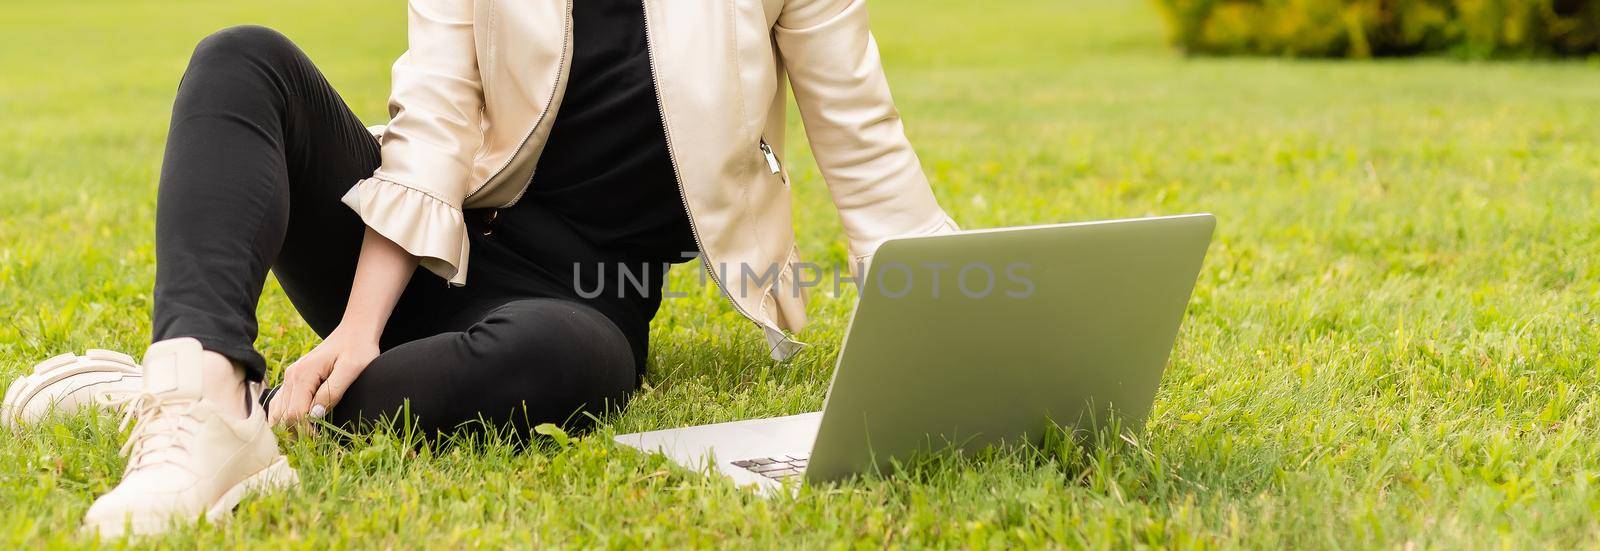 Female copywriter working on laptop in the park, view over the shoulder by Andelov13